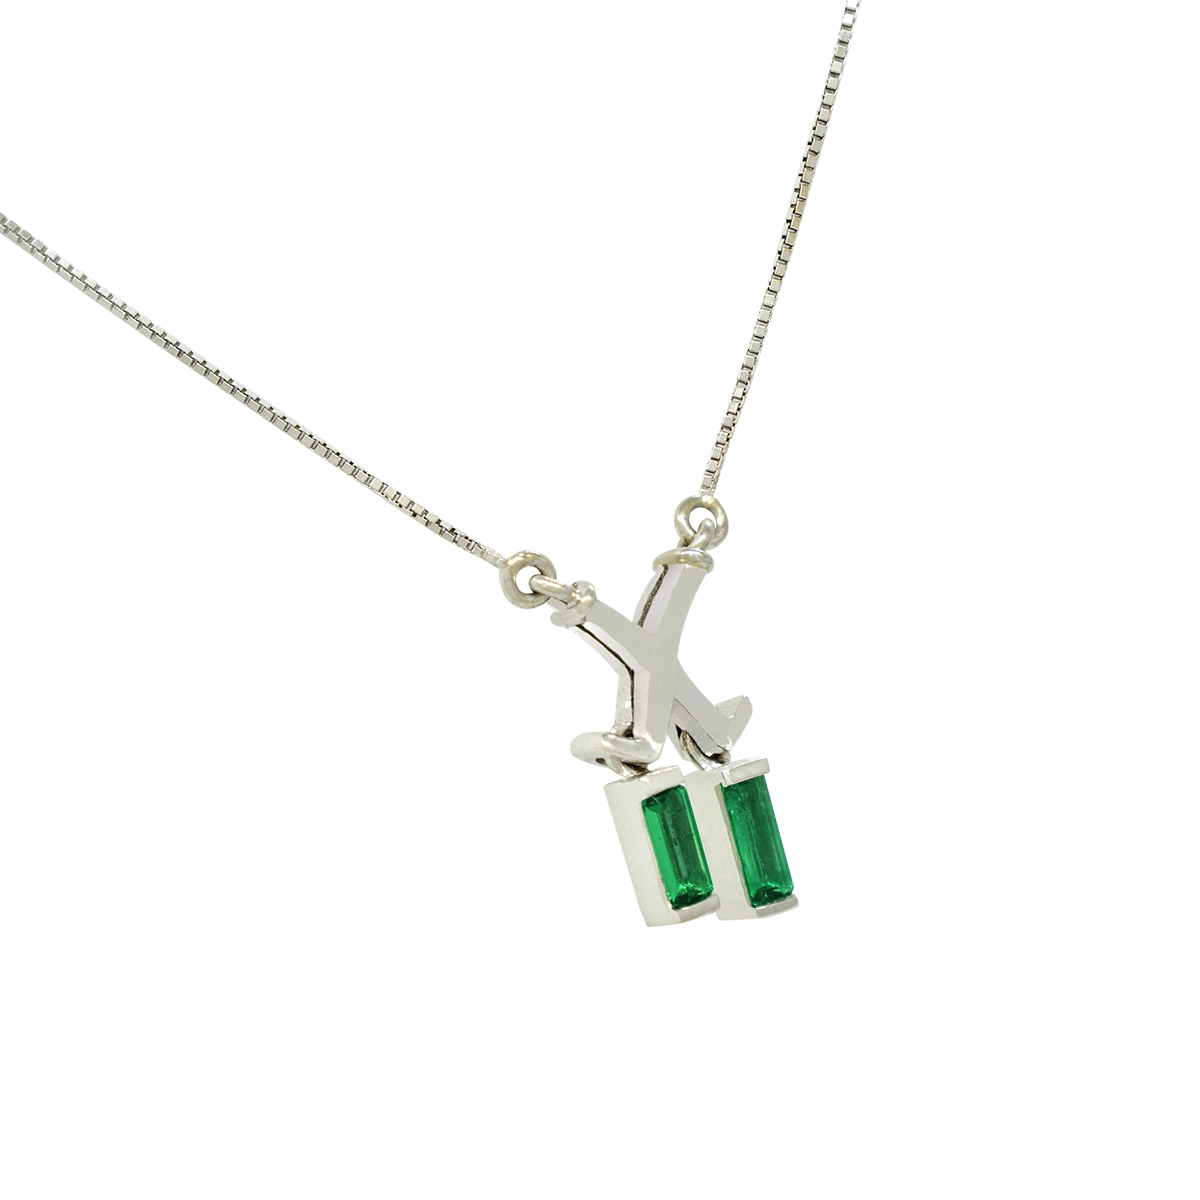 This emerald necklace has an X shape in solid 18K white gold where the two emeralds droop freely at the bottom part of the center of this gorgeous necklace